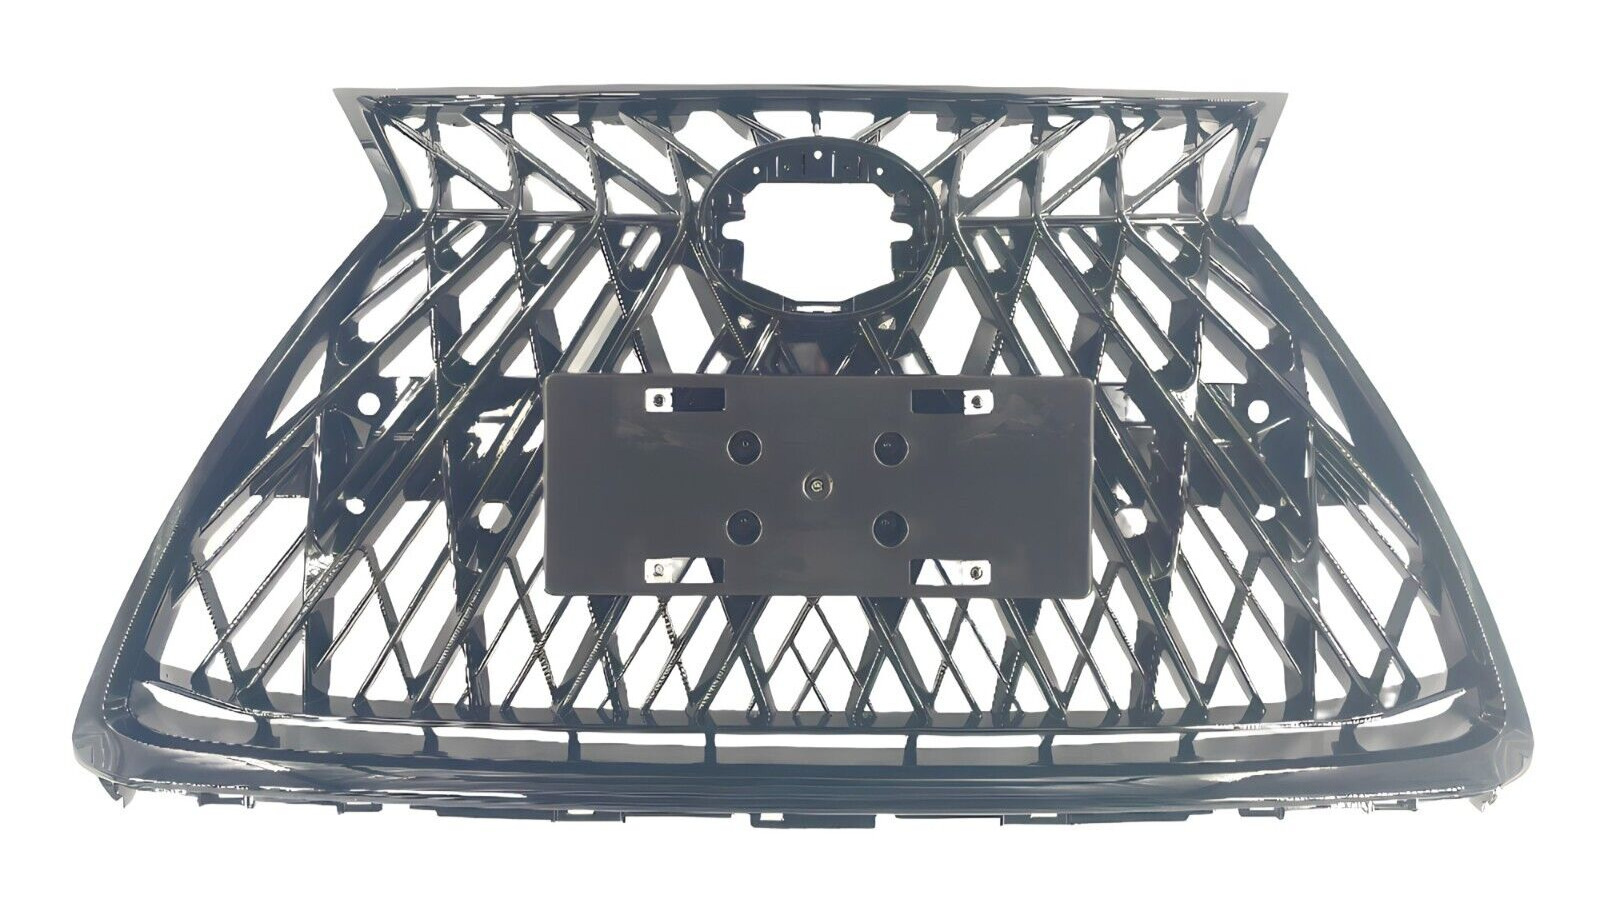 ⭐⭐ FOR 2018 - 2021 LEXUS NX300 TRD F-SPORT FRONT BUMPER UPPER GRILLE ASSEMBLY ⭐⭐